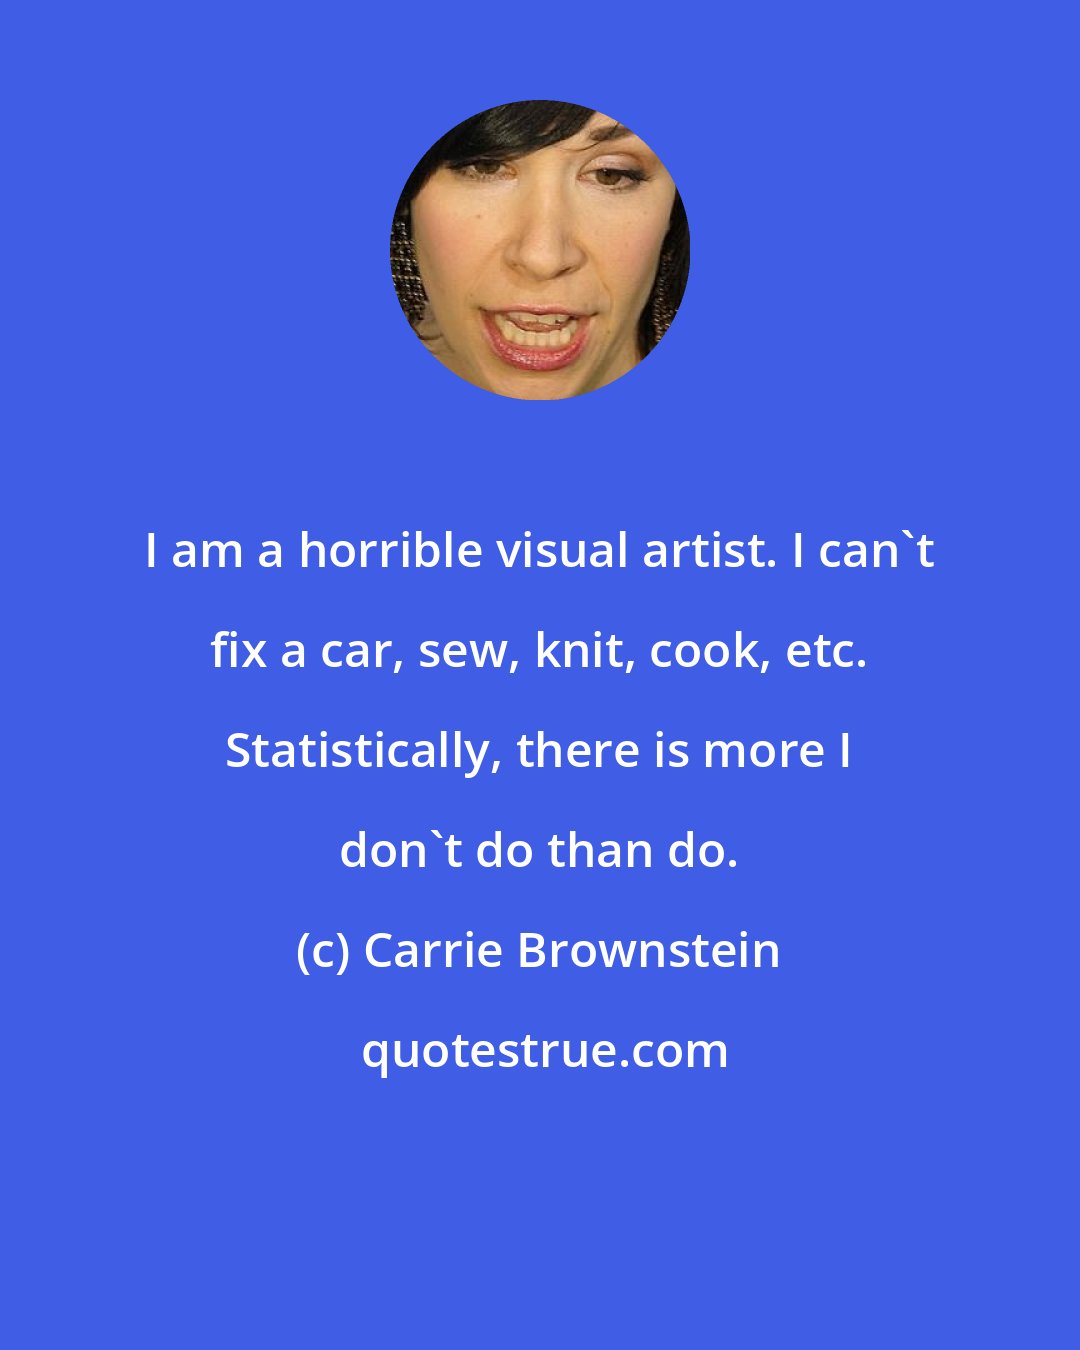 Carrie Brownstein: I am a horrible visual artist. I can't fix a car, sew, knit, cook, etc. Statistically, there is more I don't do than do.